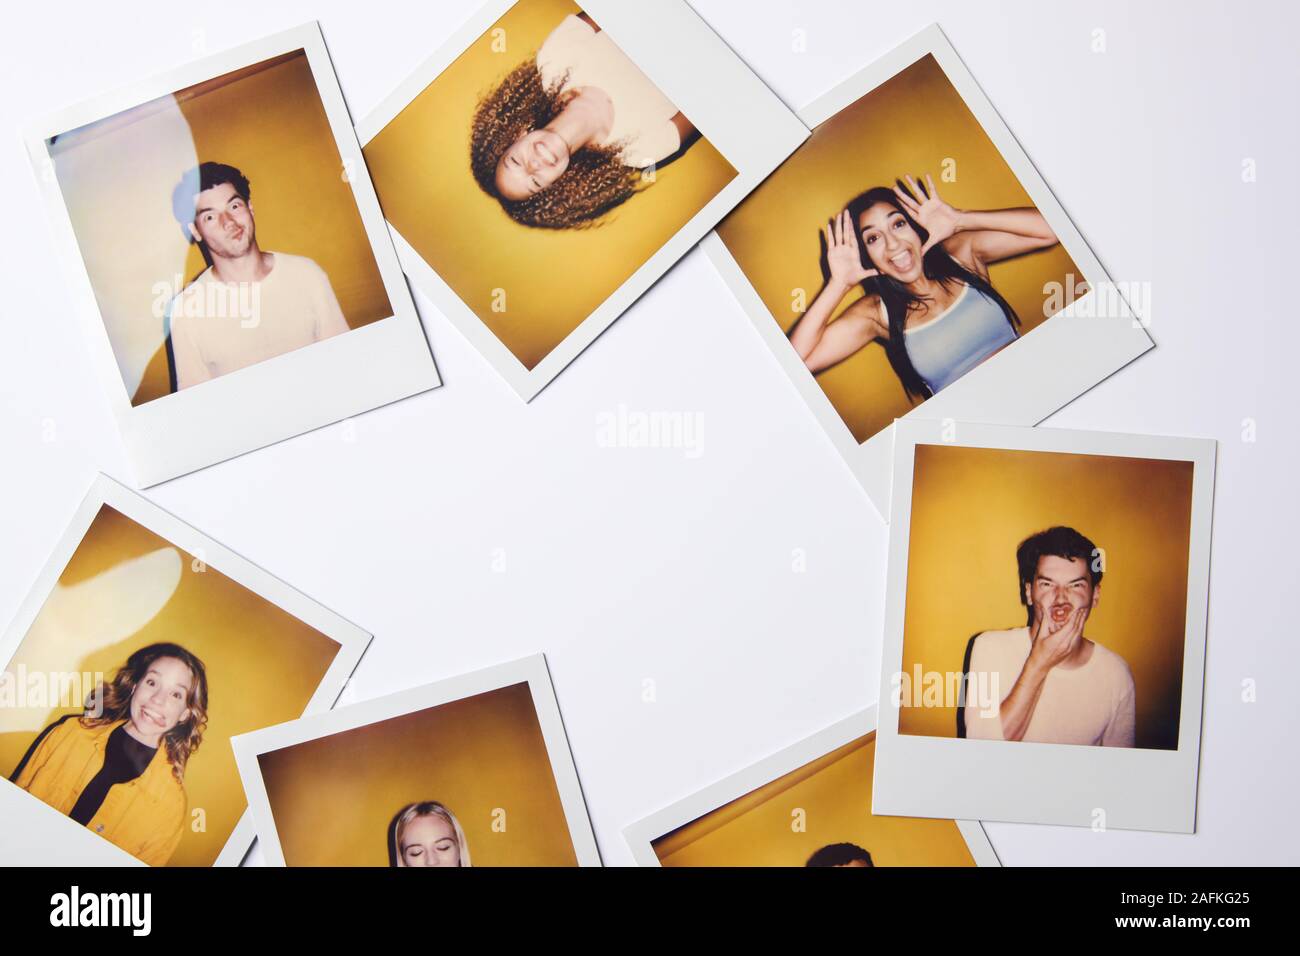 Instant Film Photos Of Young Men And Women For Modeling Casting In Studio On White Background Stock Photo